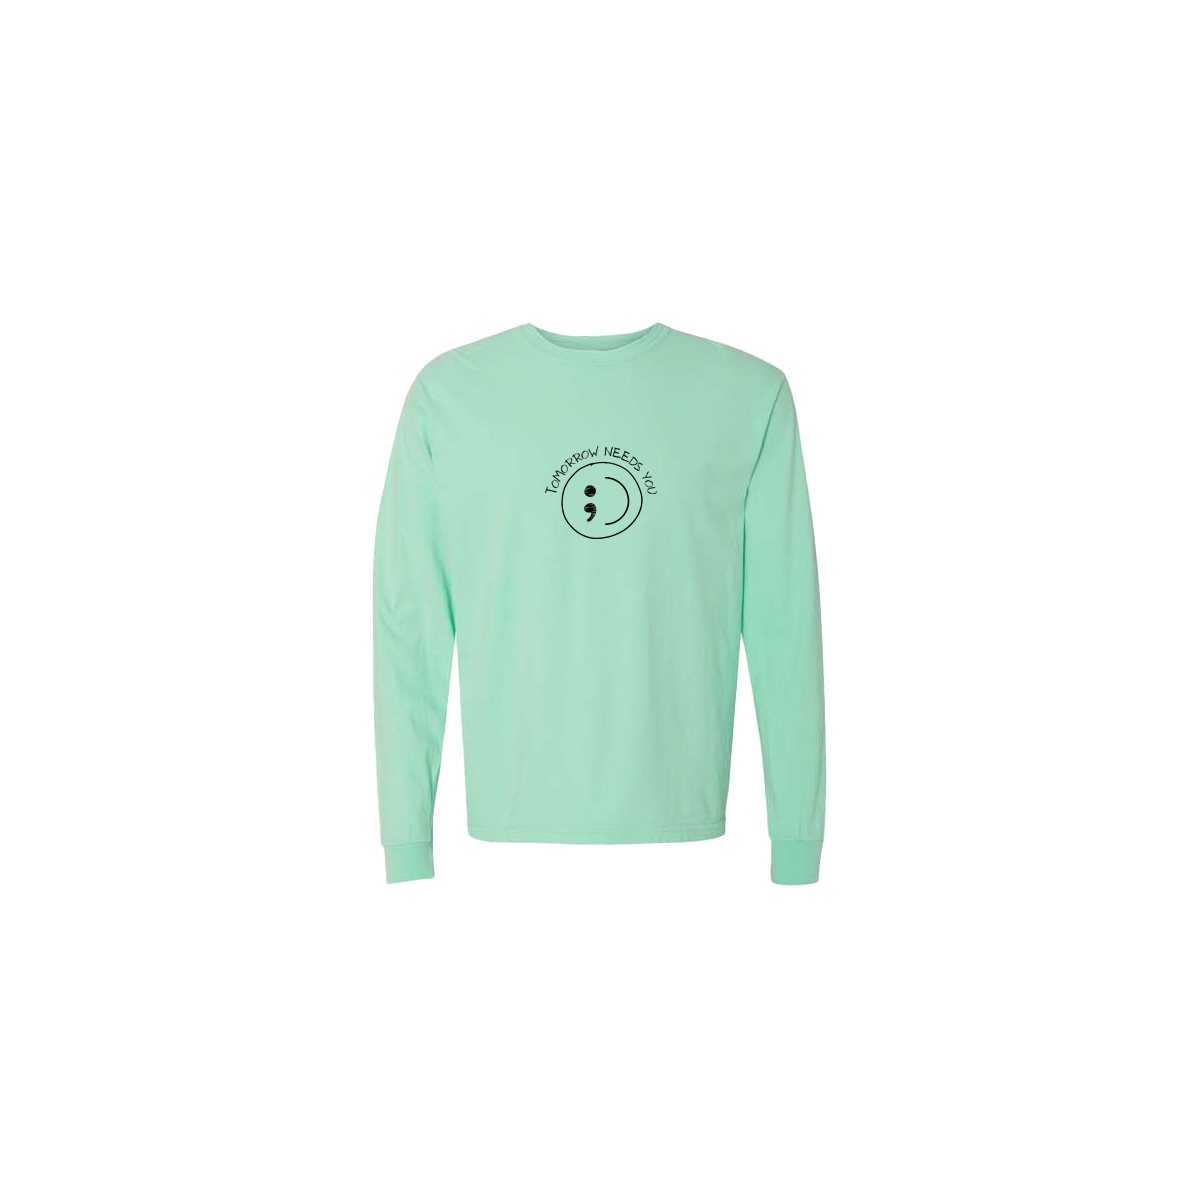 Tomorrow Needs You Embroidered Mint Long Sleeve Tshirt - Mental Health Awareness Clothing